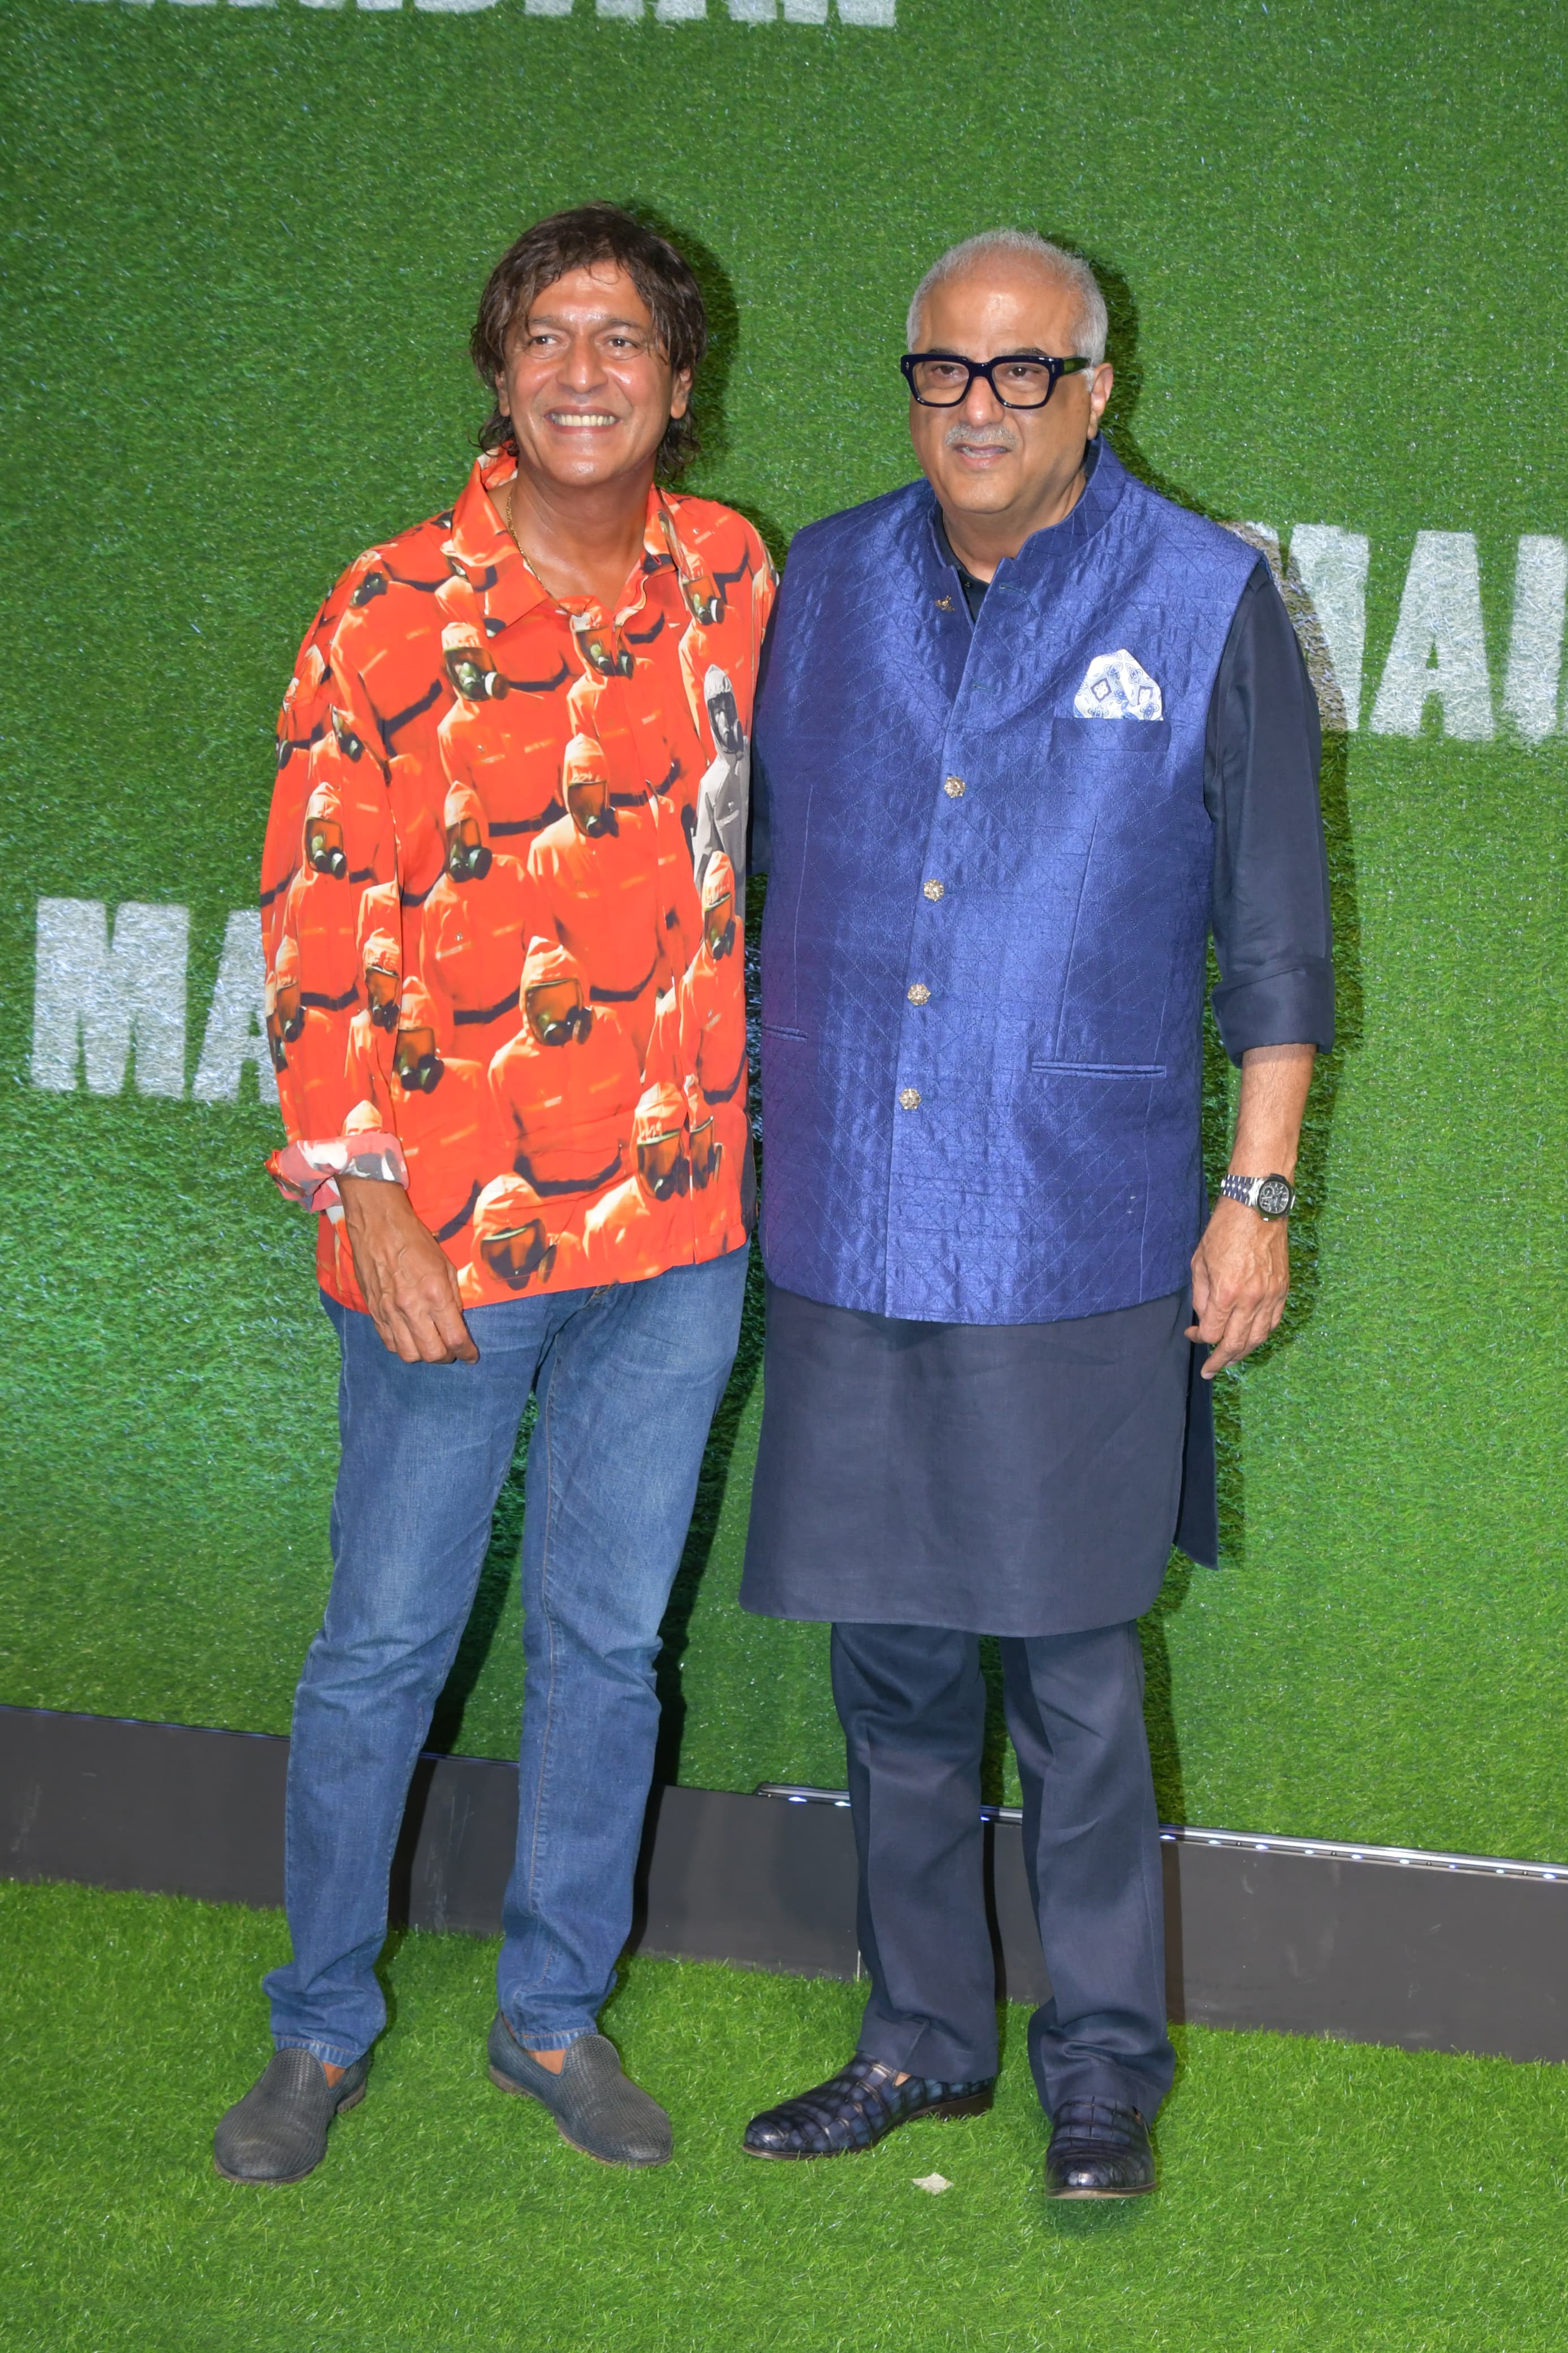 Chunky Panday also came and posed with friend Boney Kapoor